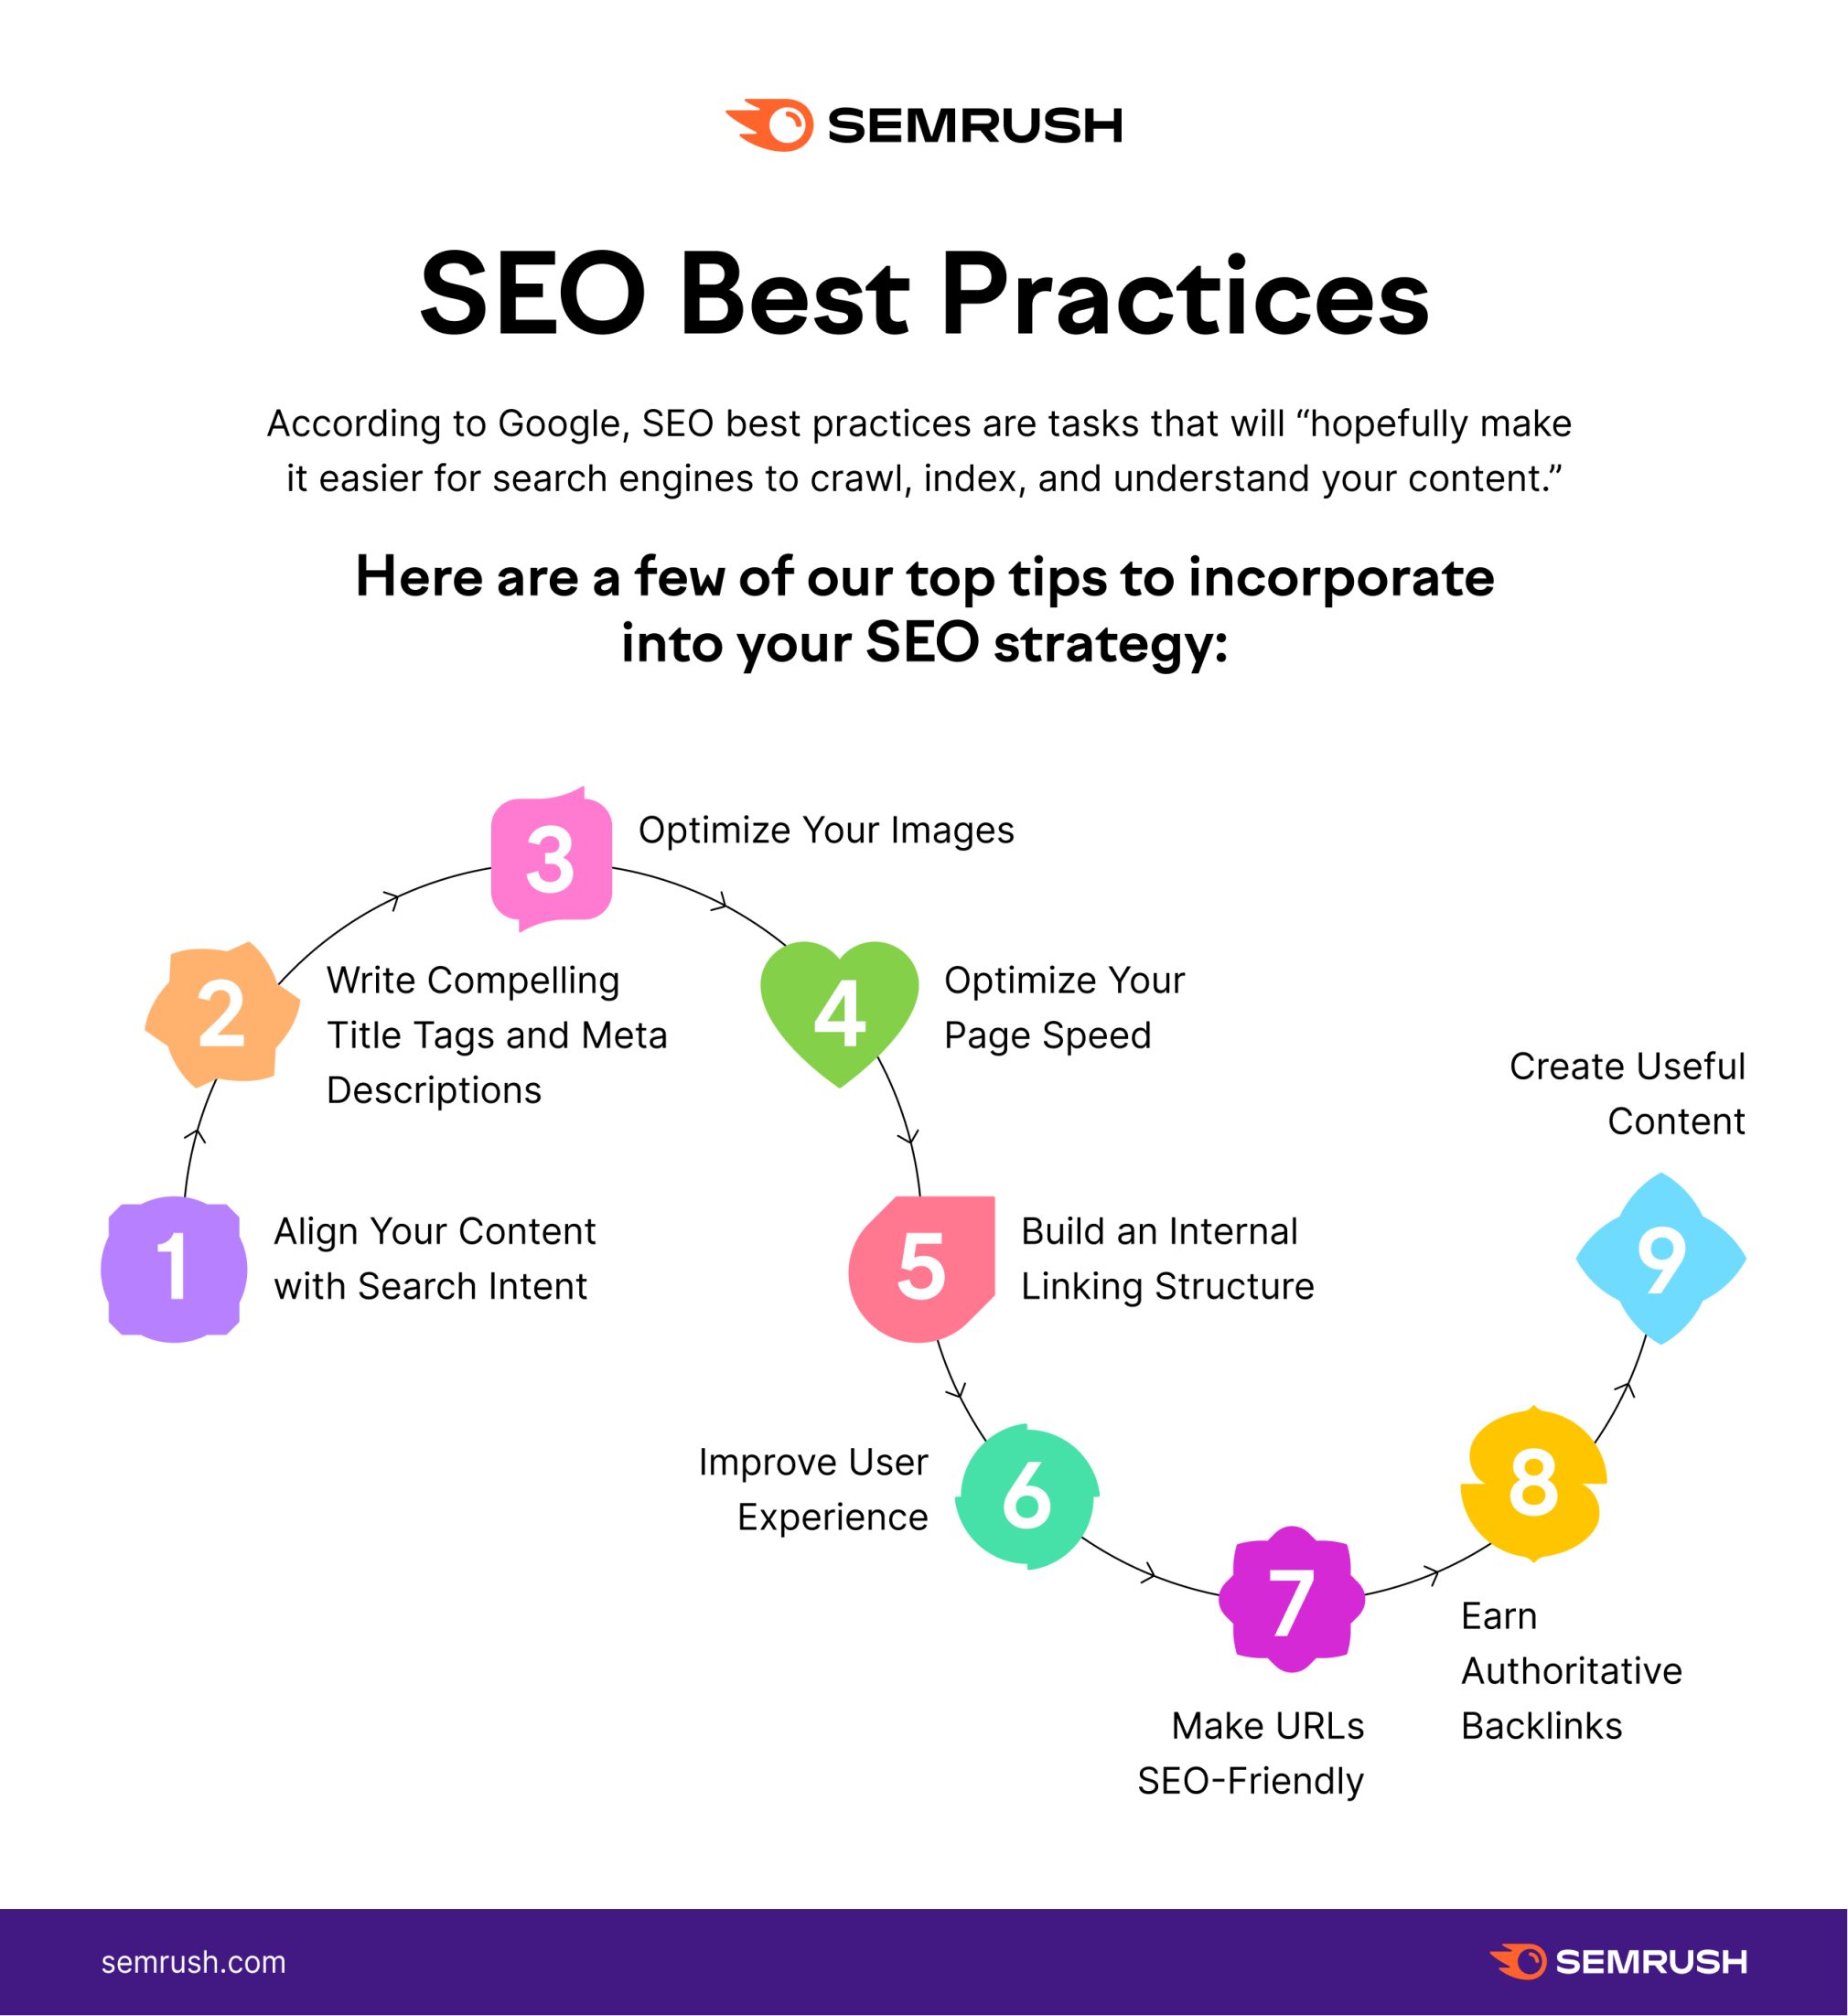 9 SEO Best Practices to Improve Your Rankings